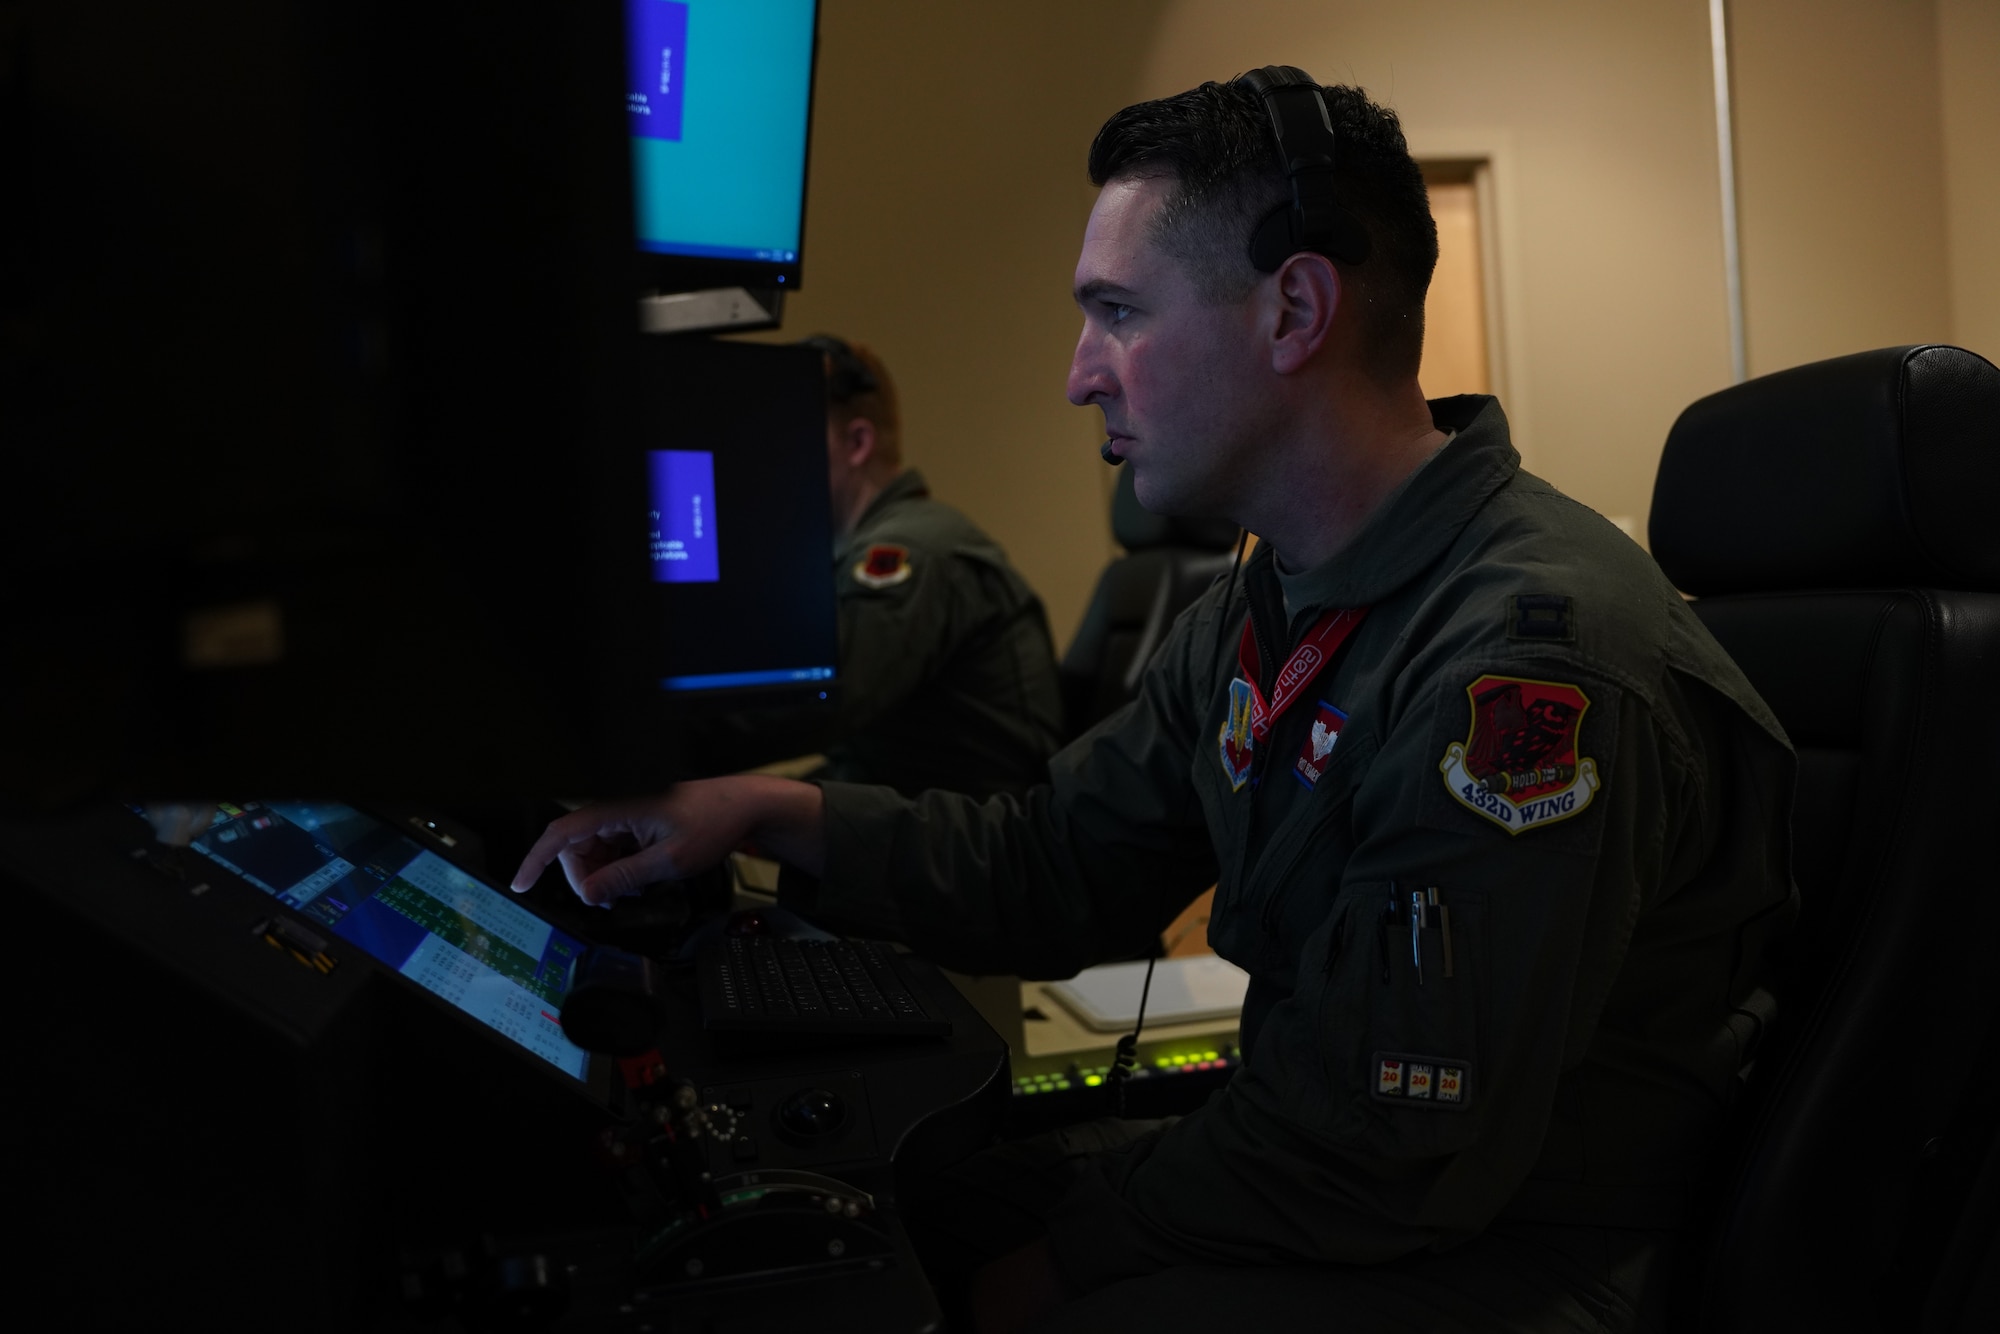 A man stares intensely at the screen of a flight simulator.